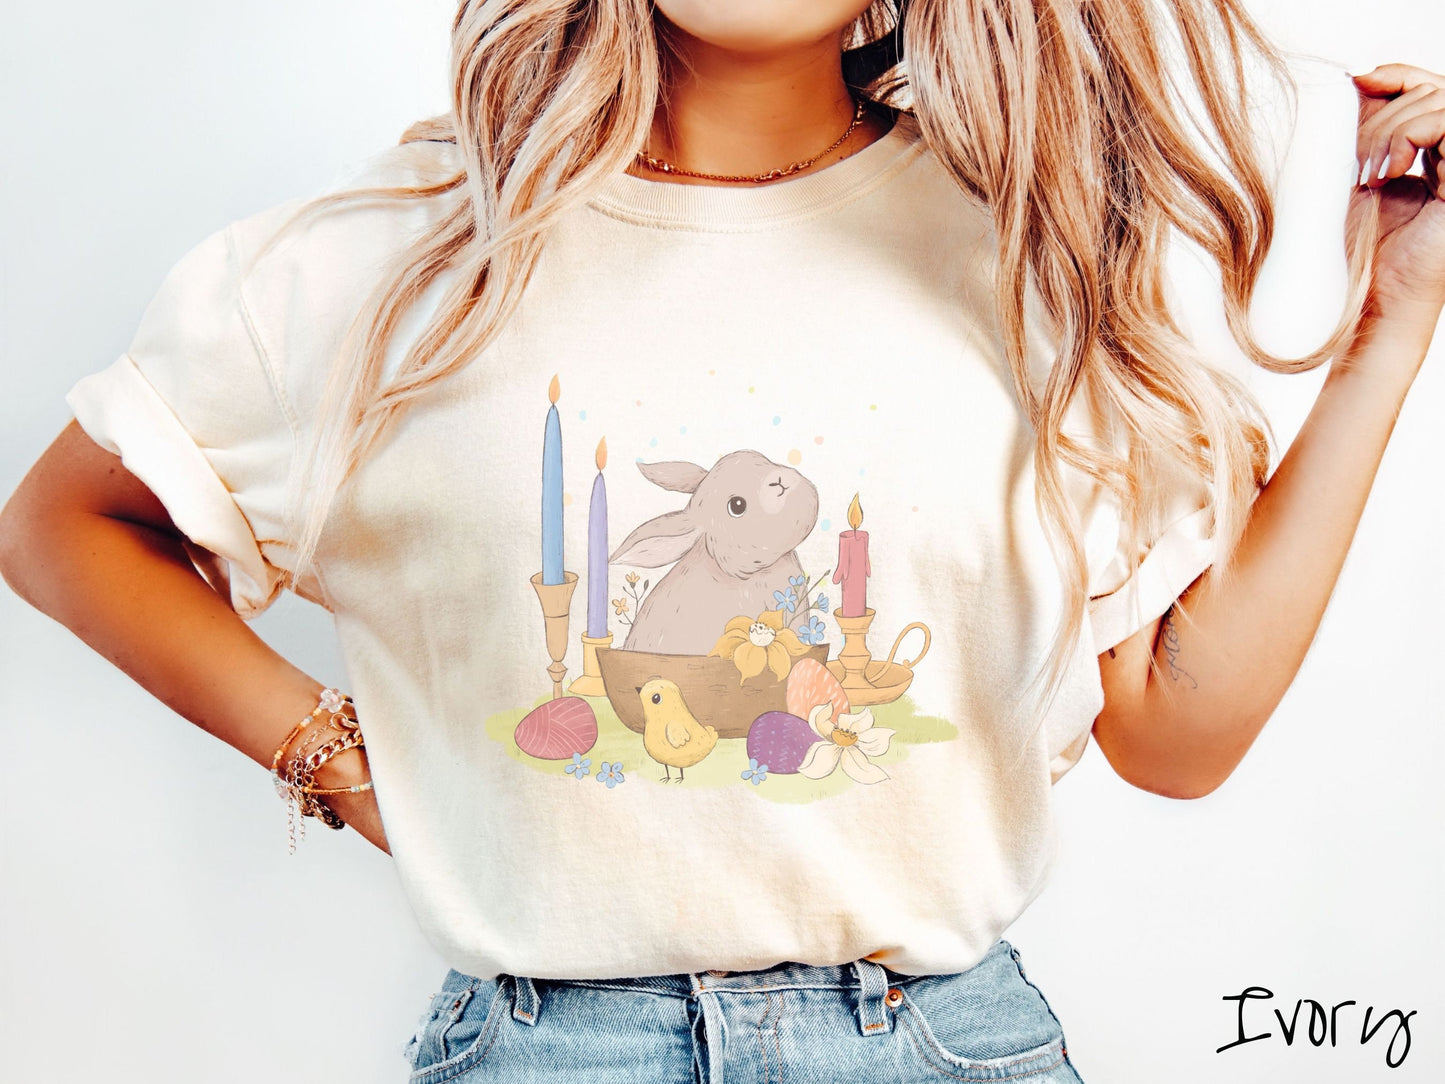 A woman wearing a cute, vintage ivory colored shirt with a gray bunny rabbit sitting in between three lit candles, some red, orange, and purple eggs, and yellow and white flowers.